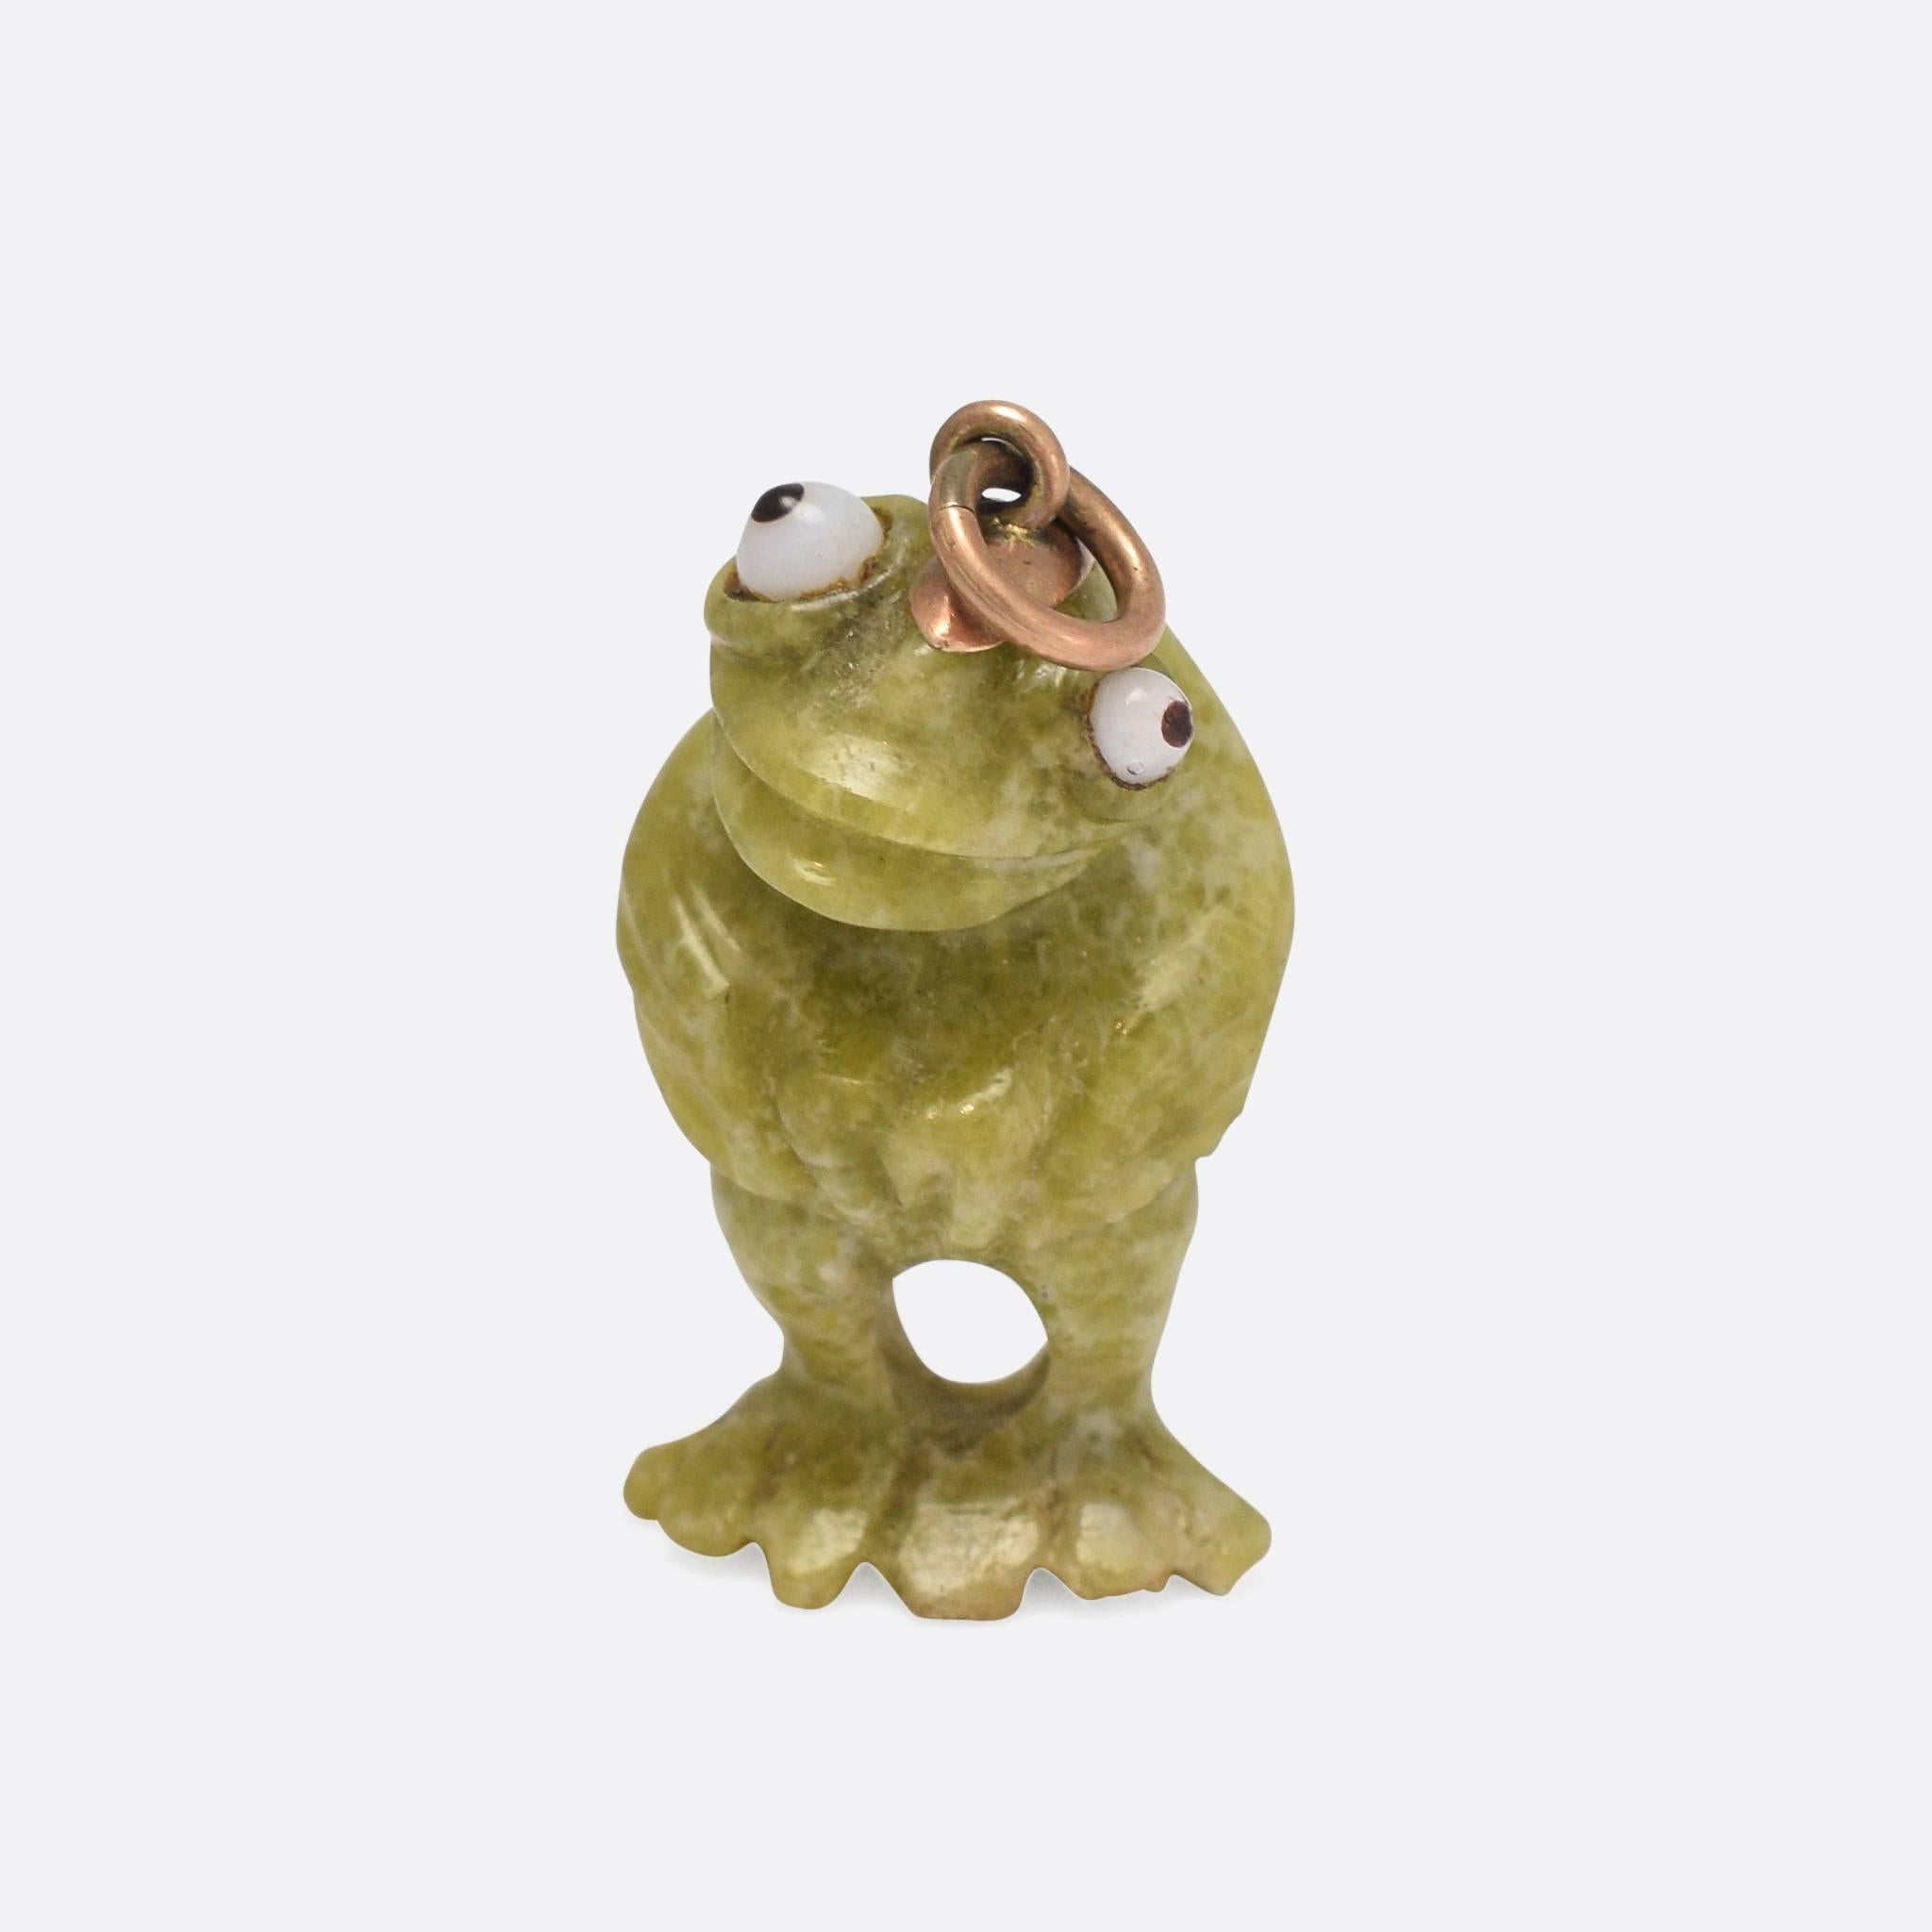 An unusual antique frog pendant, carved from a single piece of Irish Connemara Marble. The frog has different sized glass eyes, giving a comedic feel to the piece. With gold fittings for wear as a pendant, the carving is executed very well indeed.